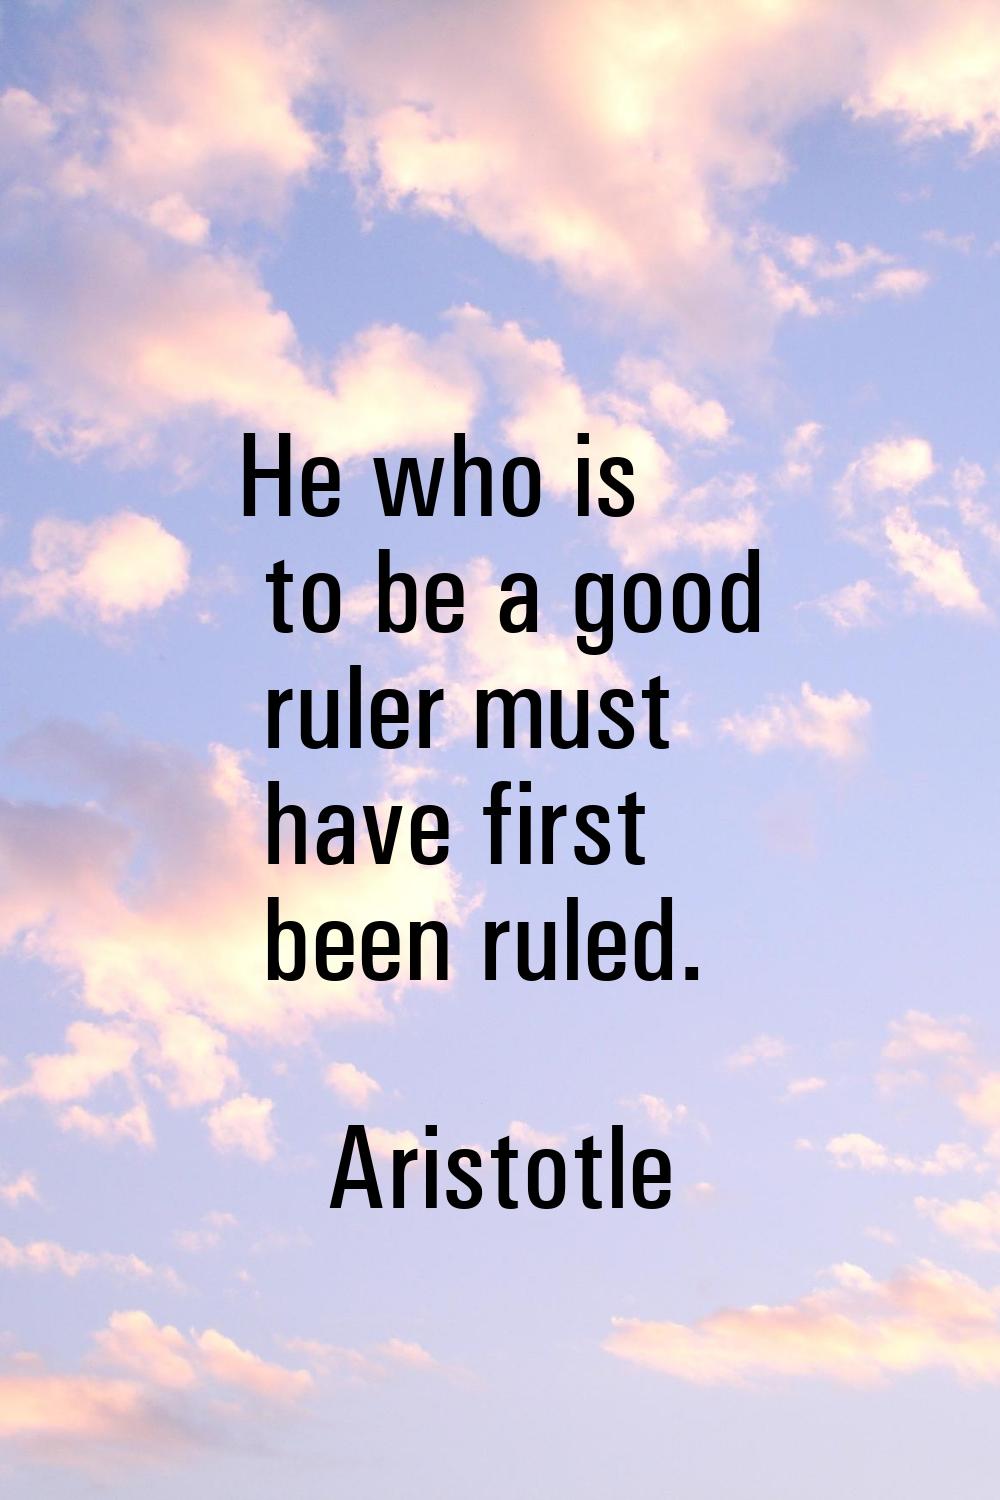 He who is to be a good ruler must have first been ruled.